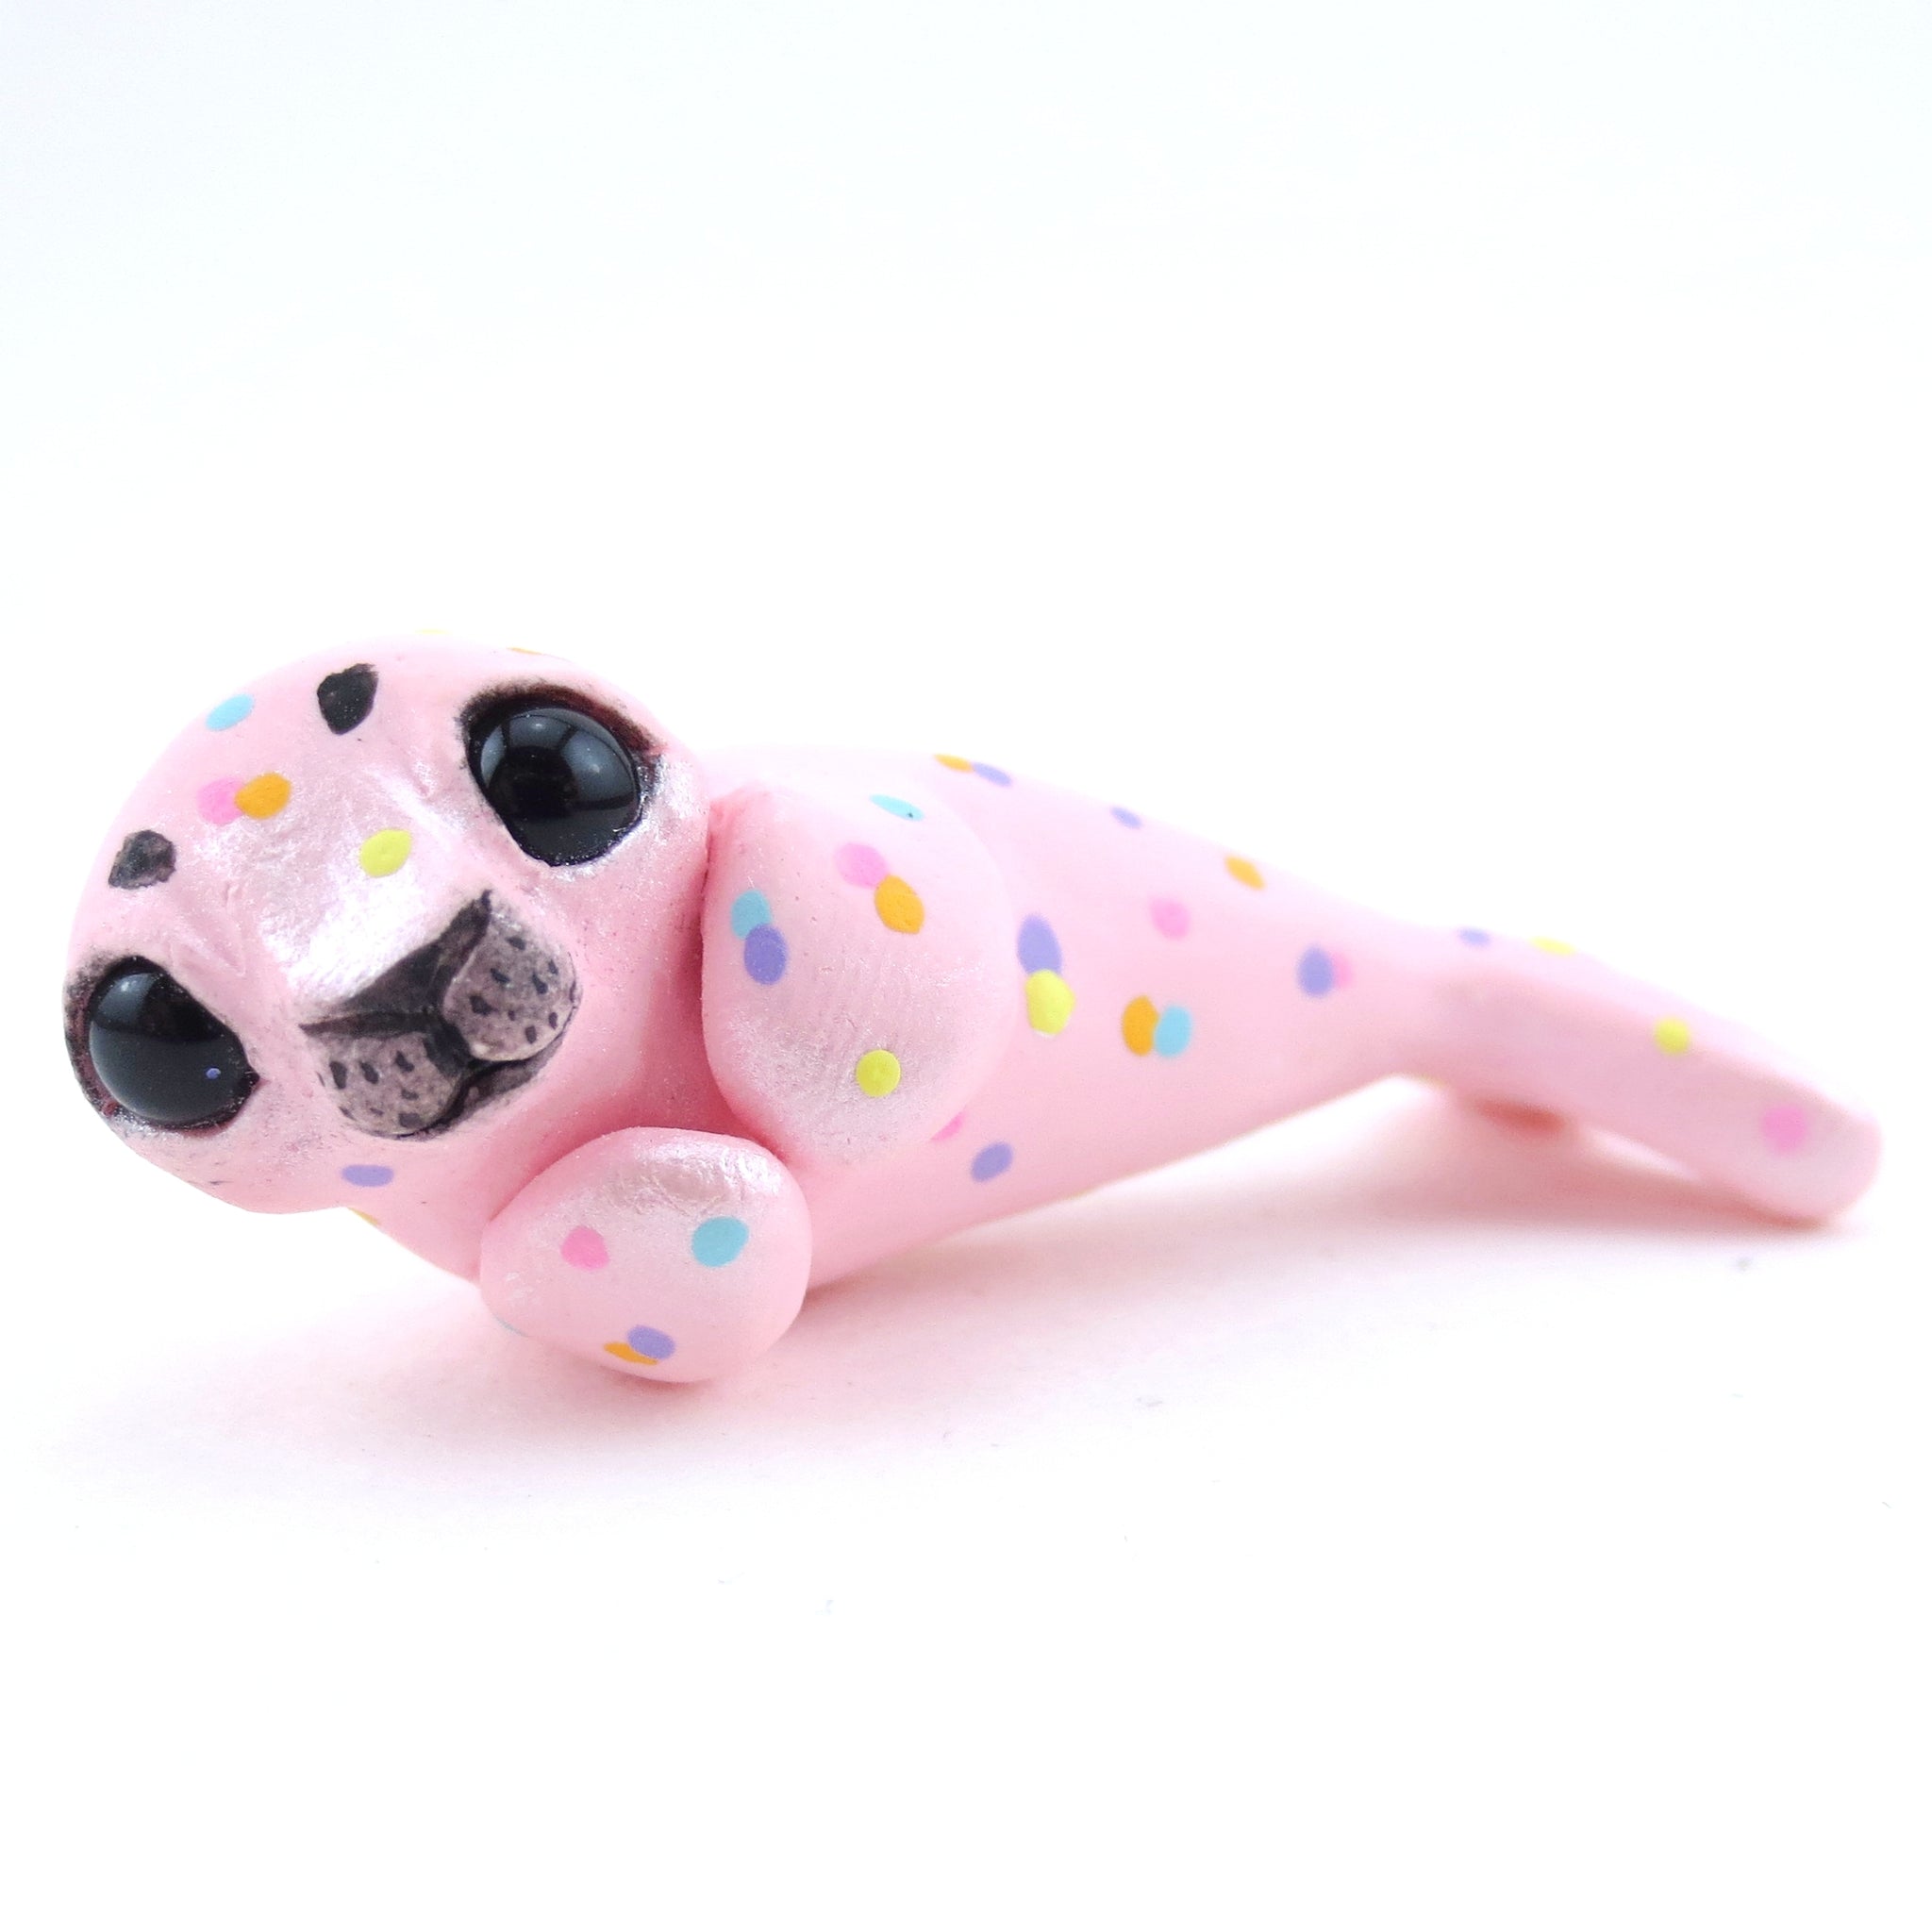 Purrrrrl Pearl Cat, Baby Seal, and Seashell Figurine Set - Polymer C –  Narwhal Carousel Co.